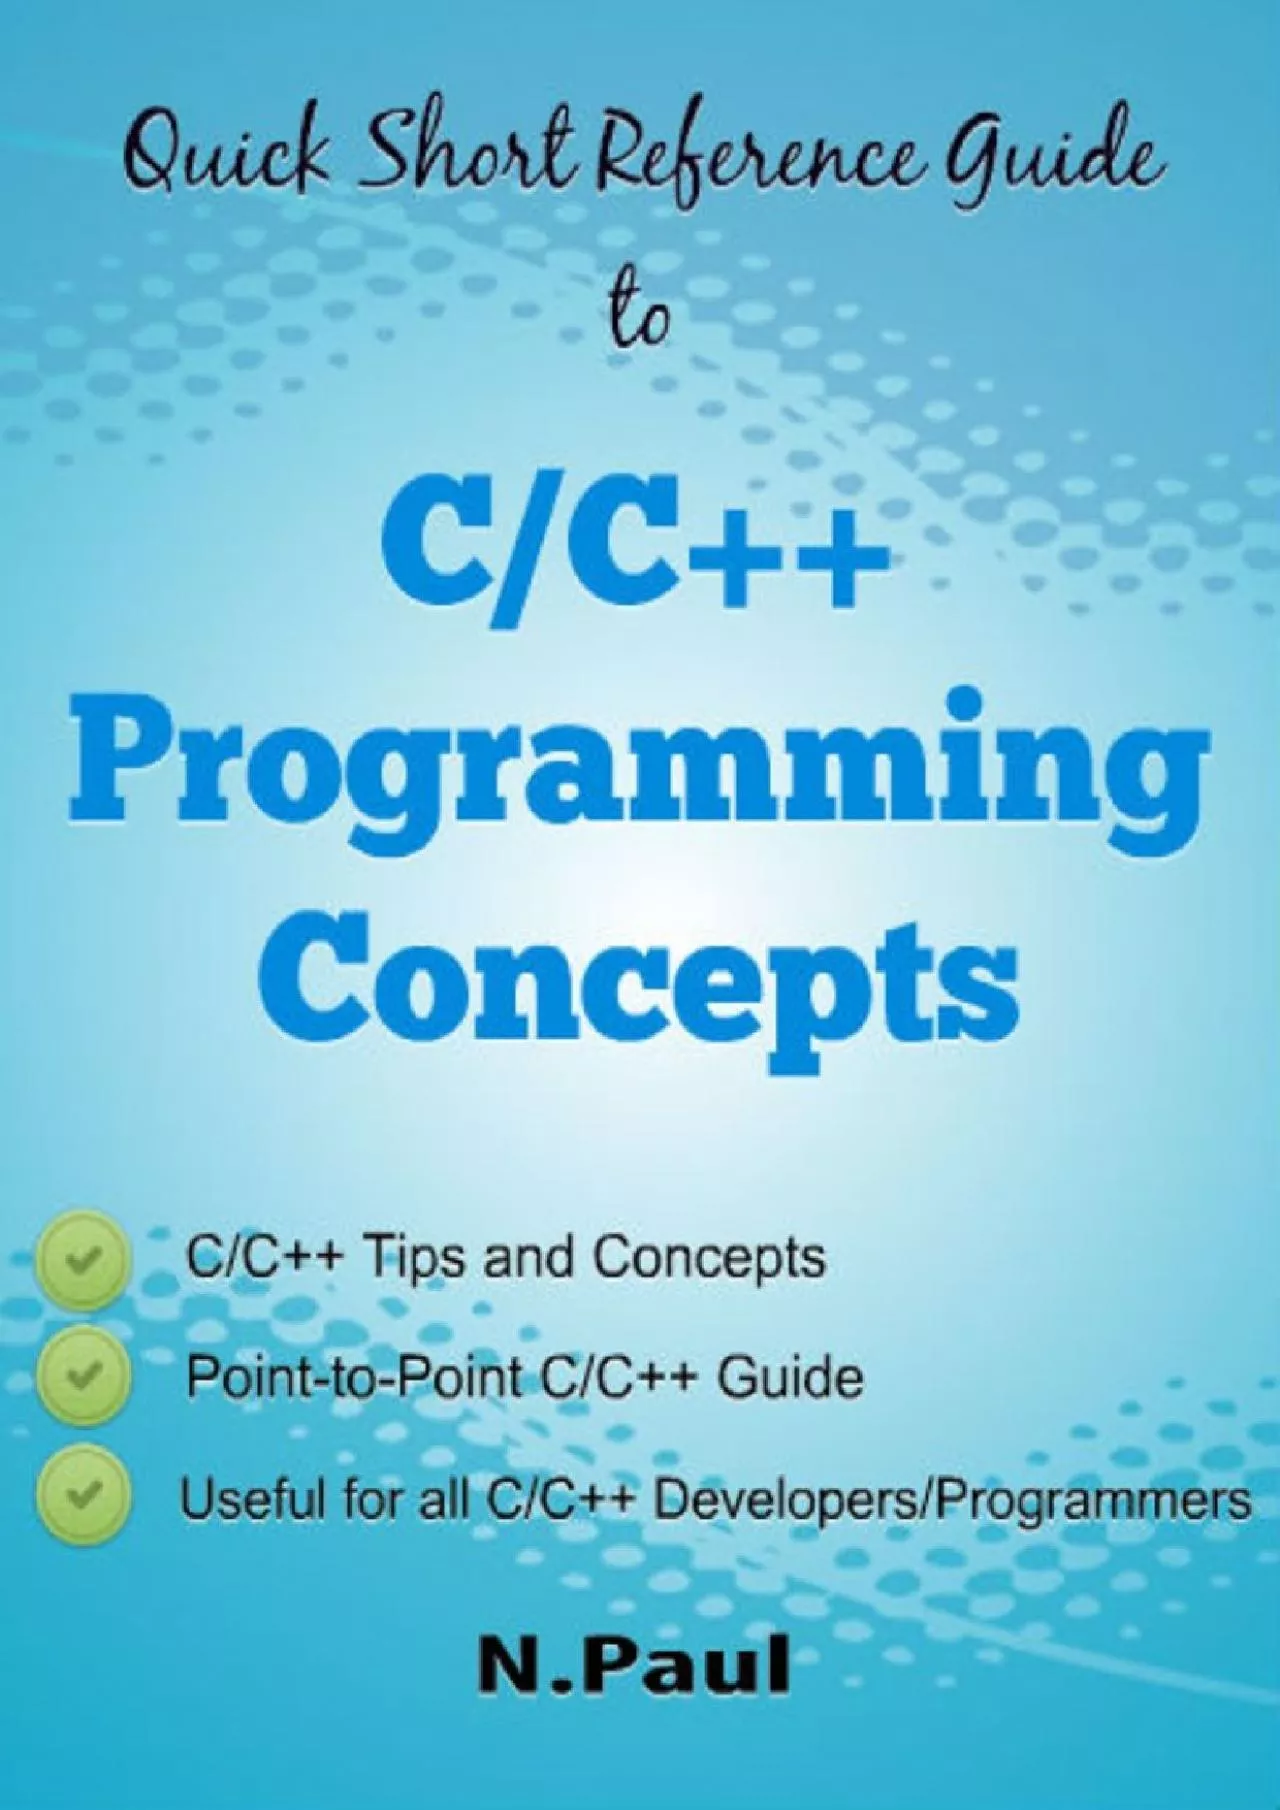 [BEST]-Quick Short Reference Guide to C/C++ Programming Concepts: C/C++ Tips and Concepts: